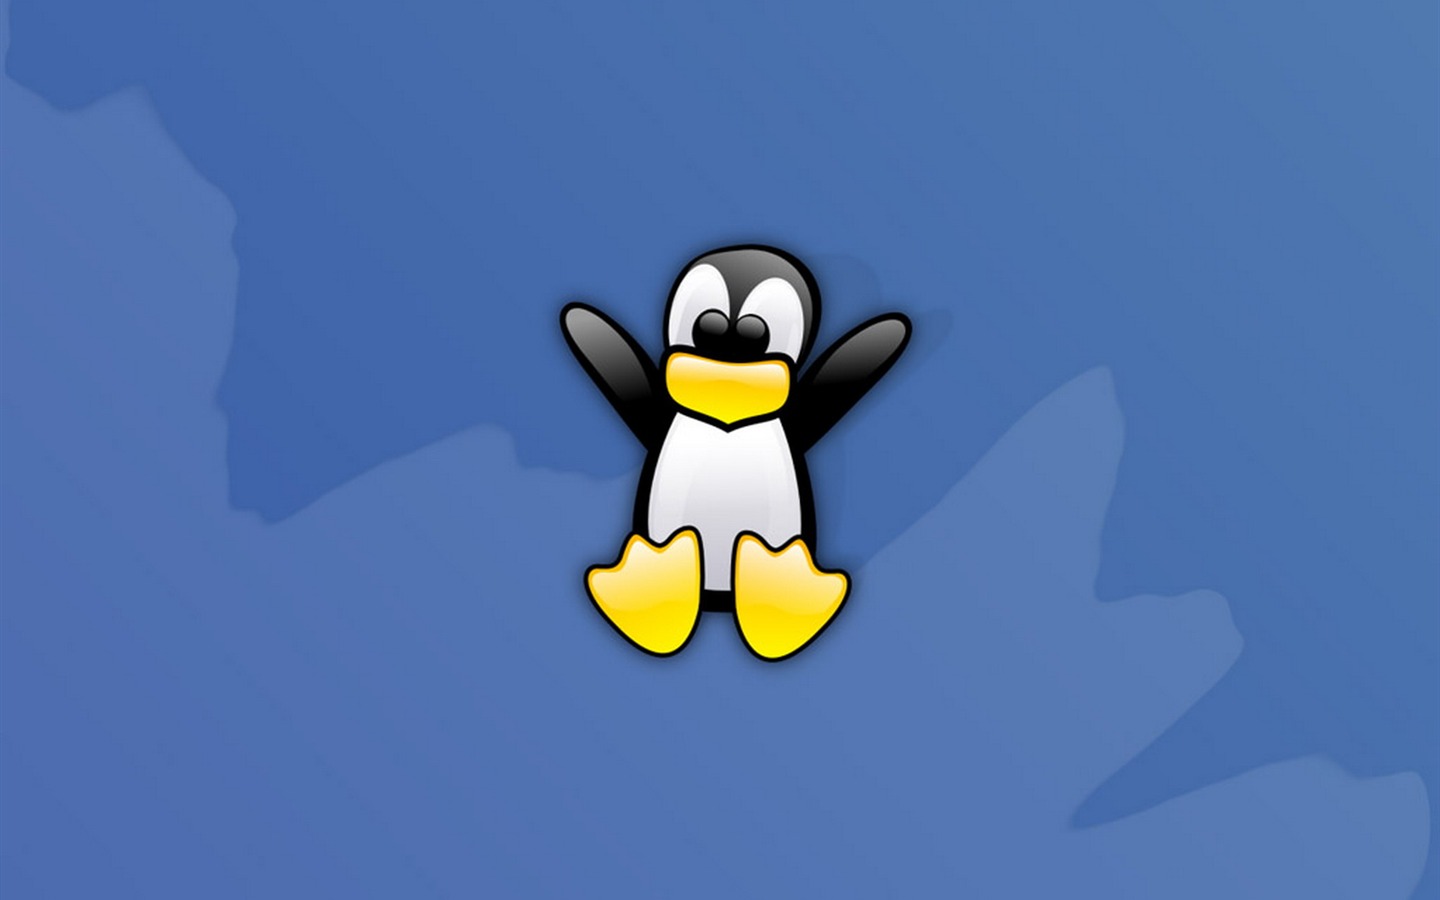 Linux tapety (2) #18 - 1440x900